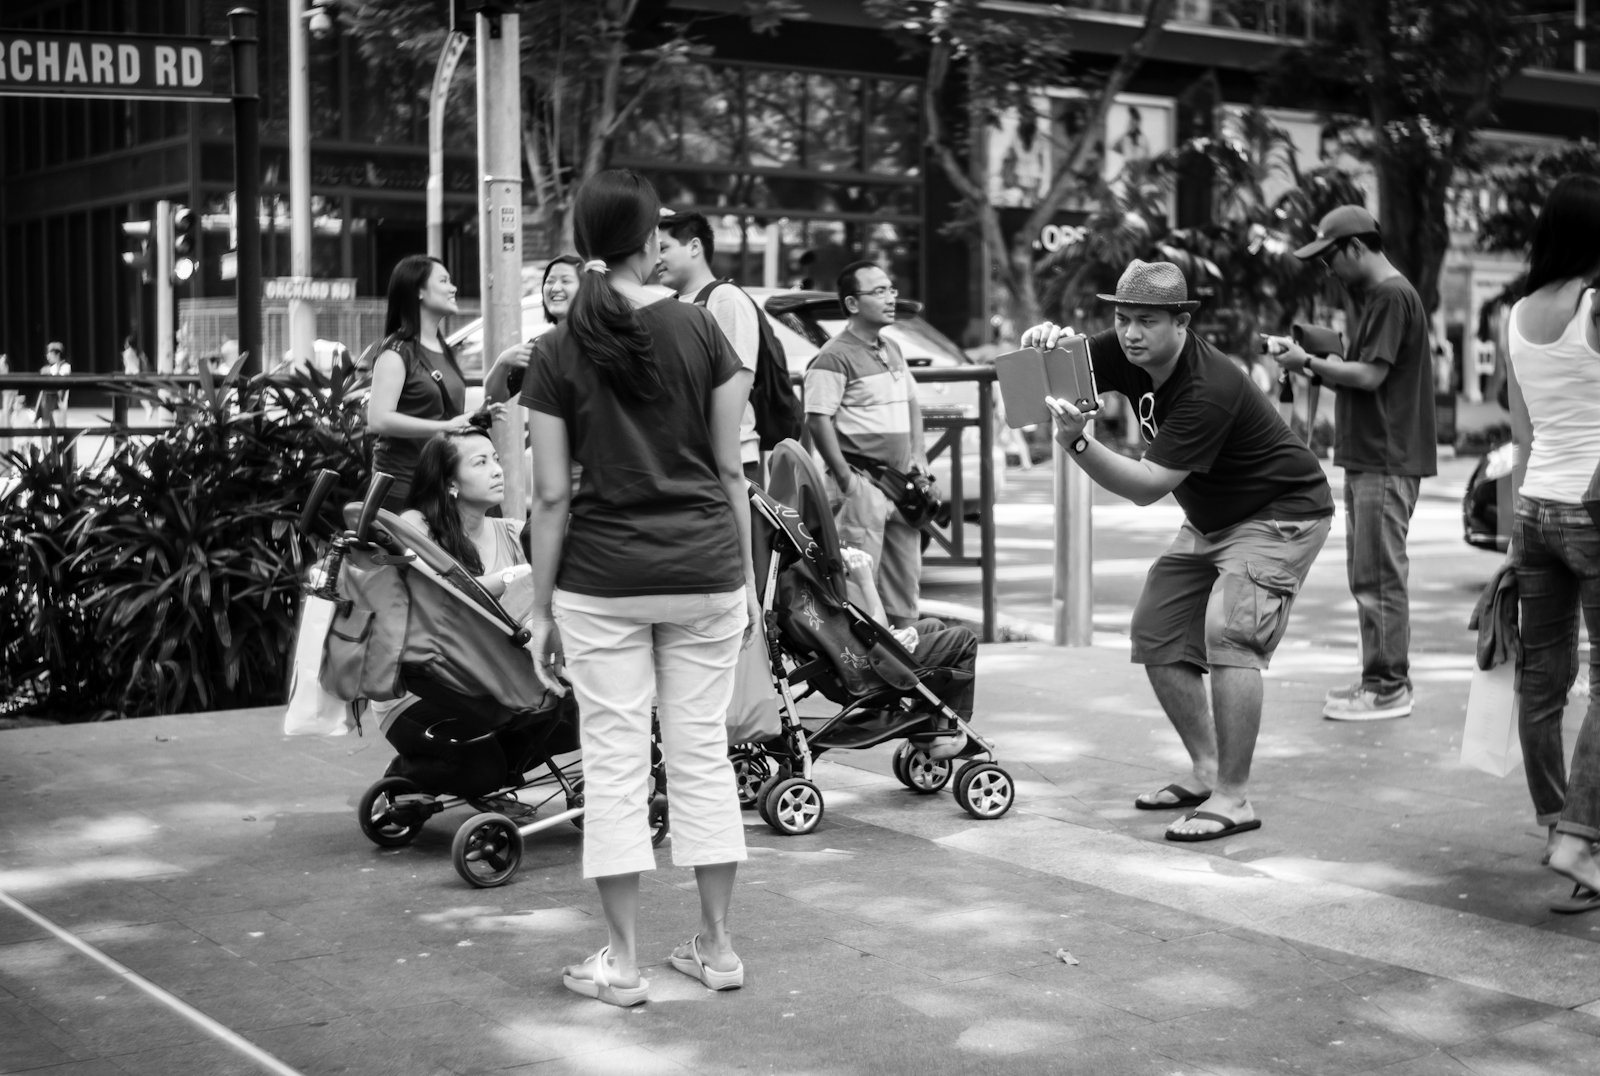 Street photography - Tourist taking photos with a tablet